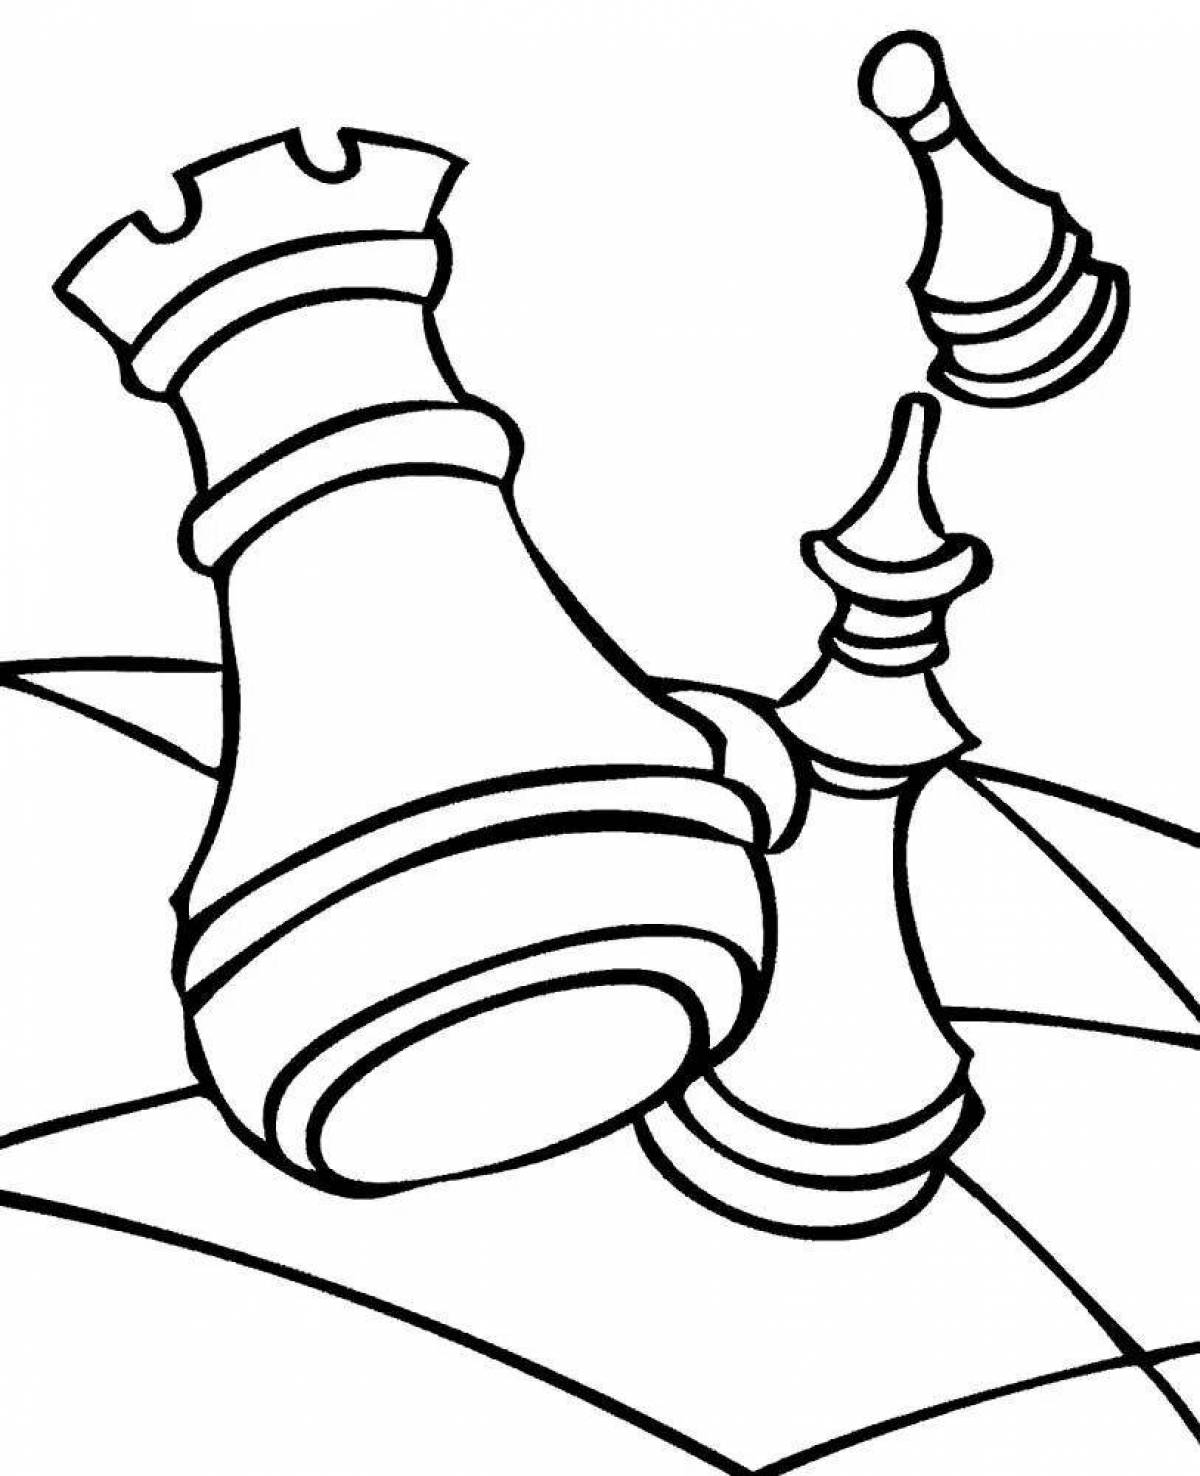 Fun coloring chess for kids